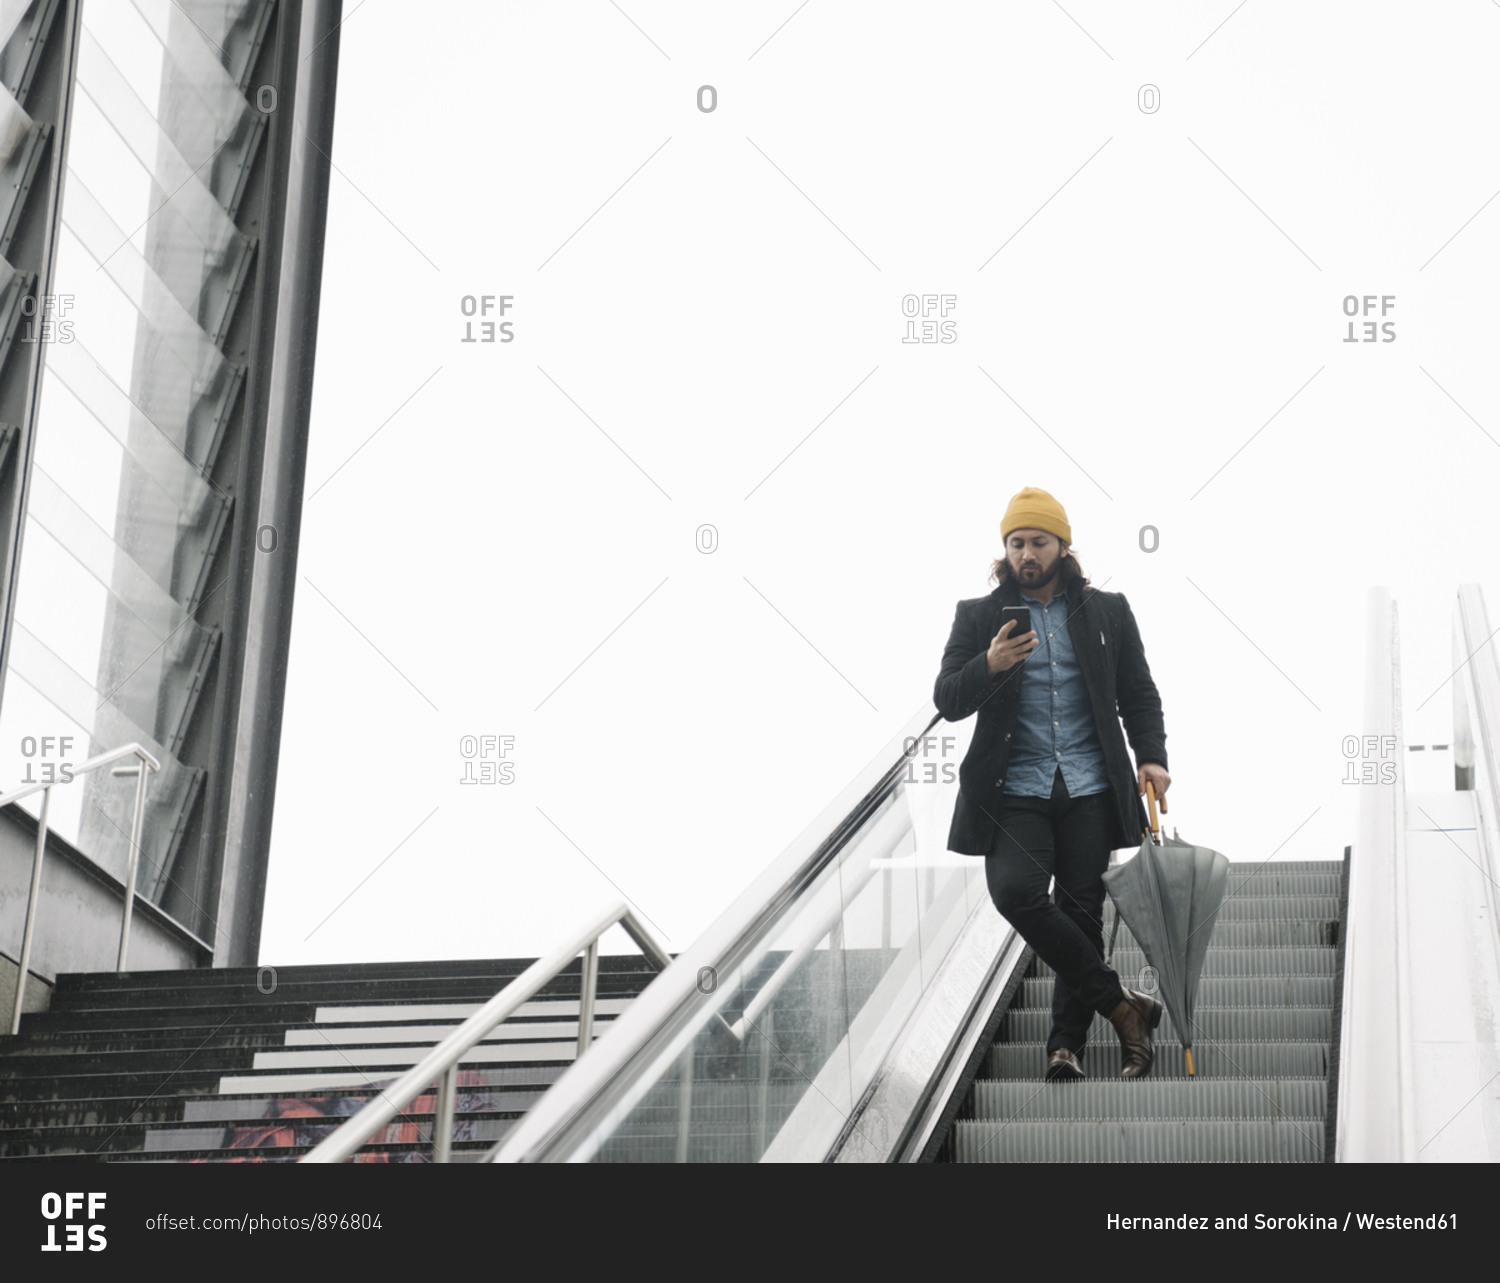 Man with umbrella standing on  escalator looking at smartphone- Berlin- Germany